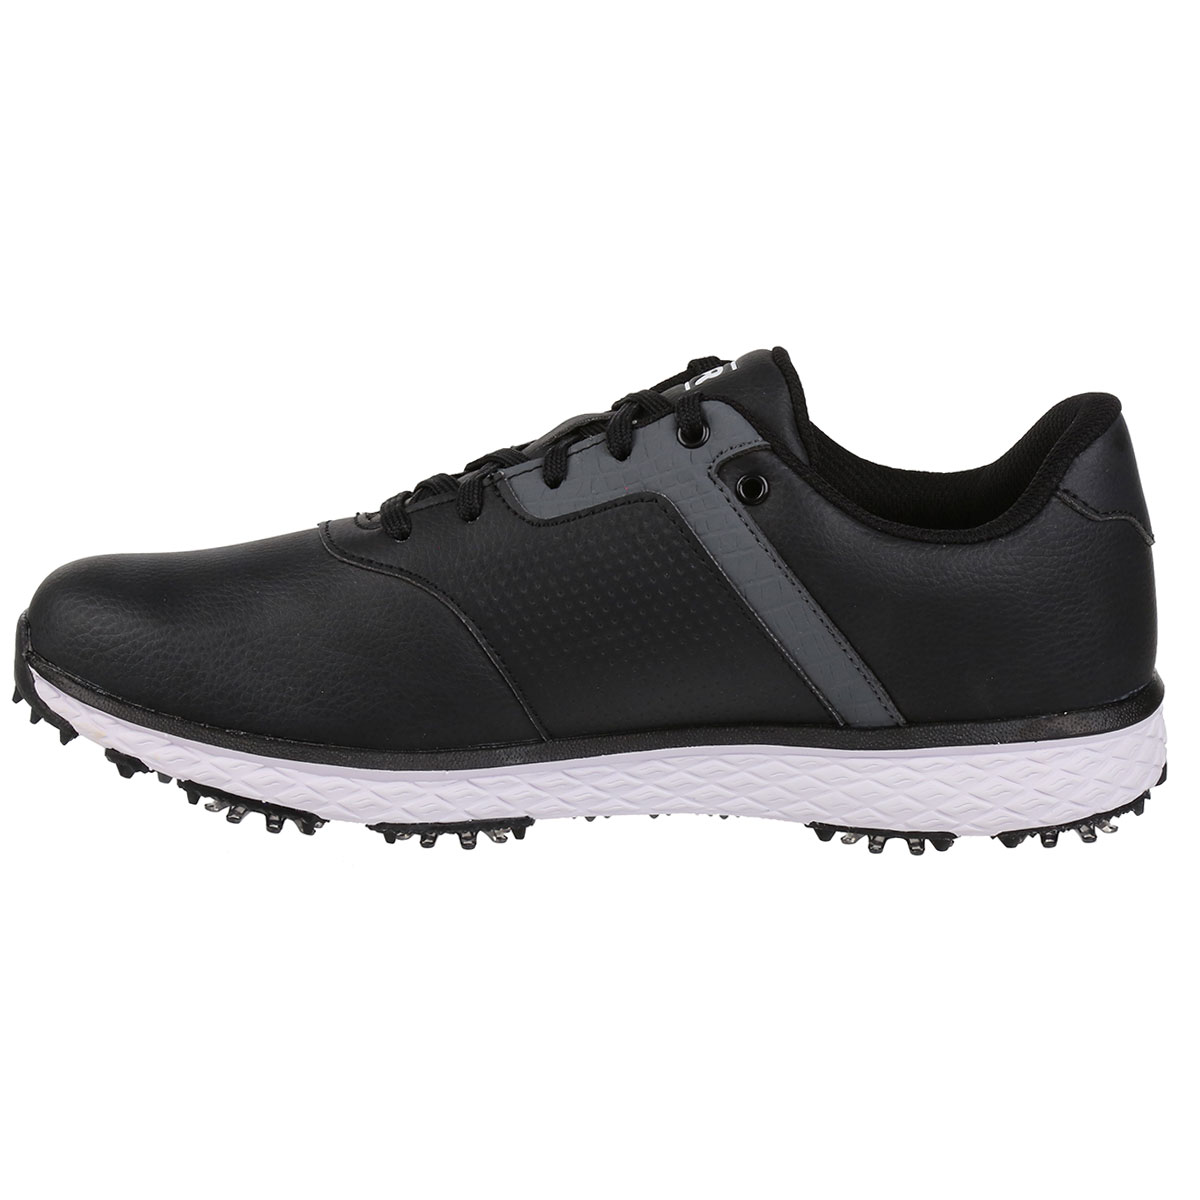 Rife Men's Lightning Waterproof Spiked Golf Shoes from american golf